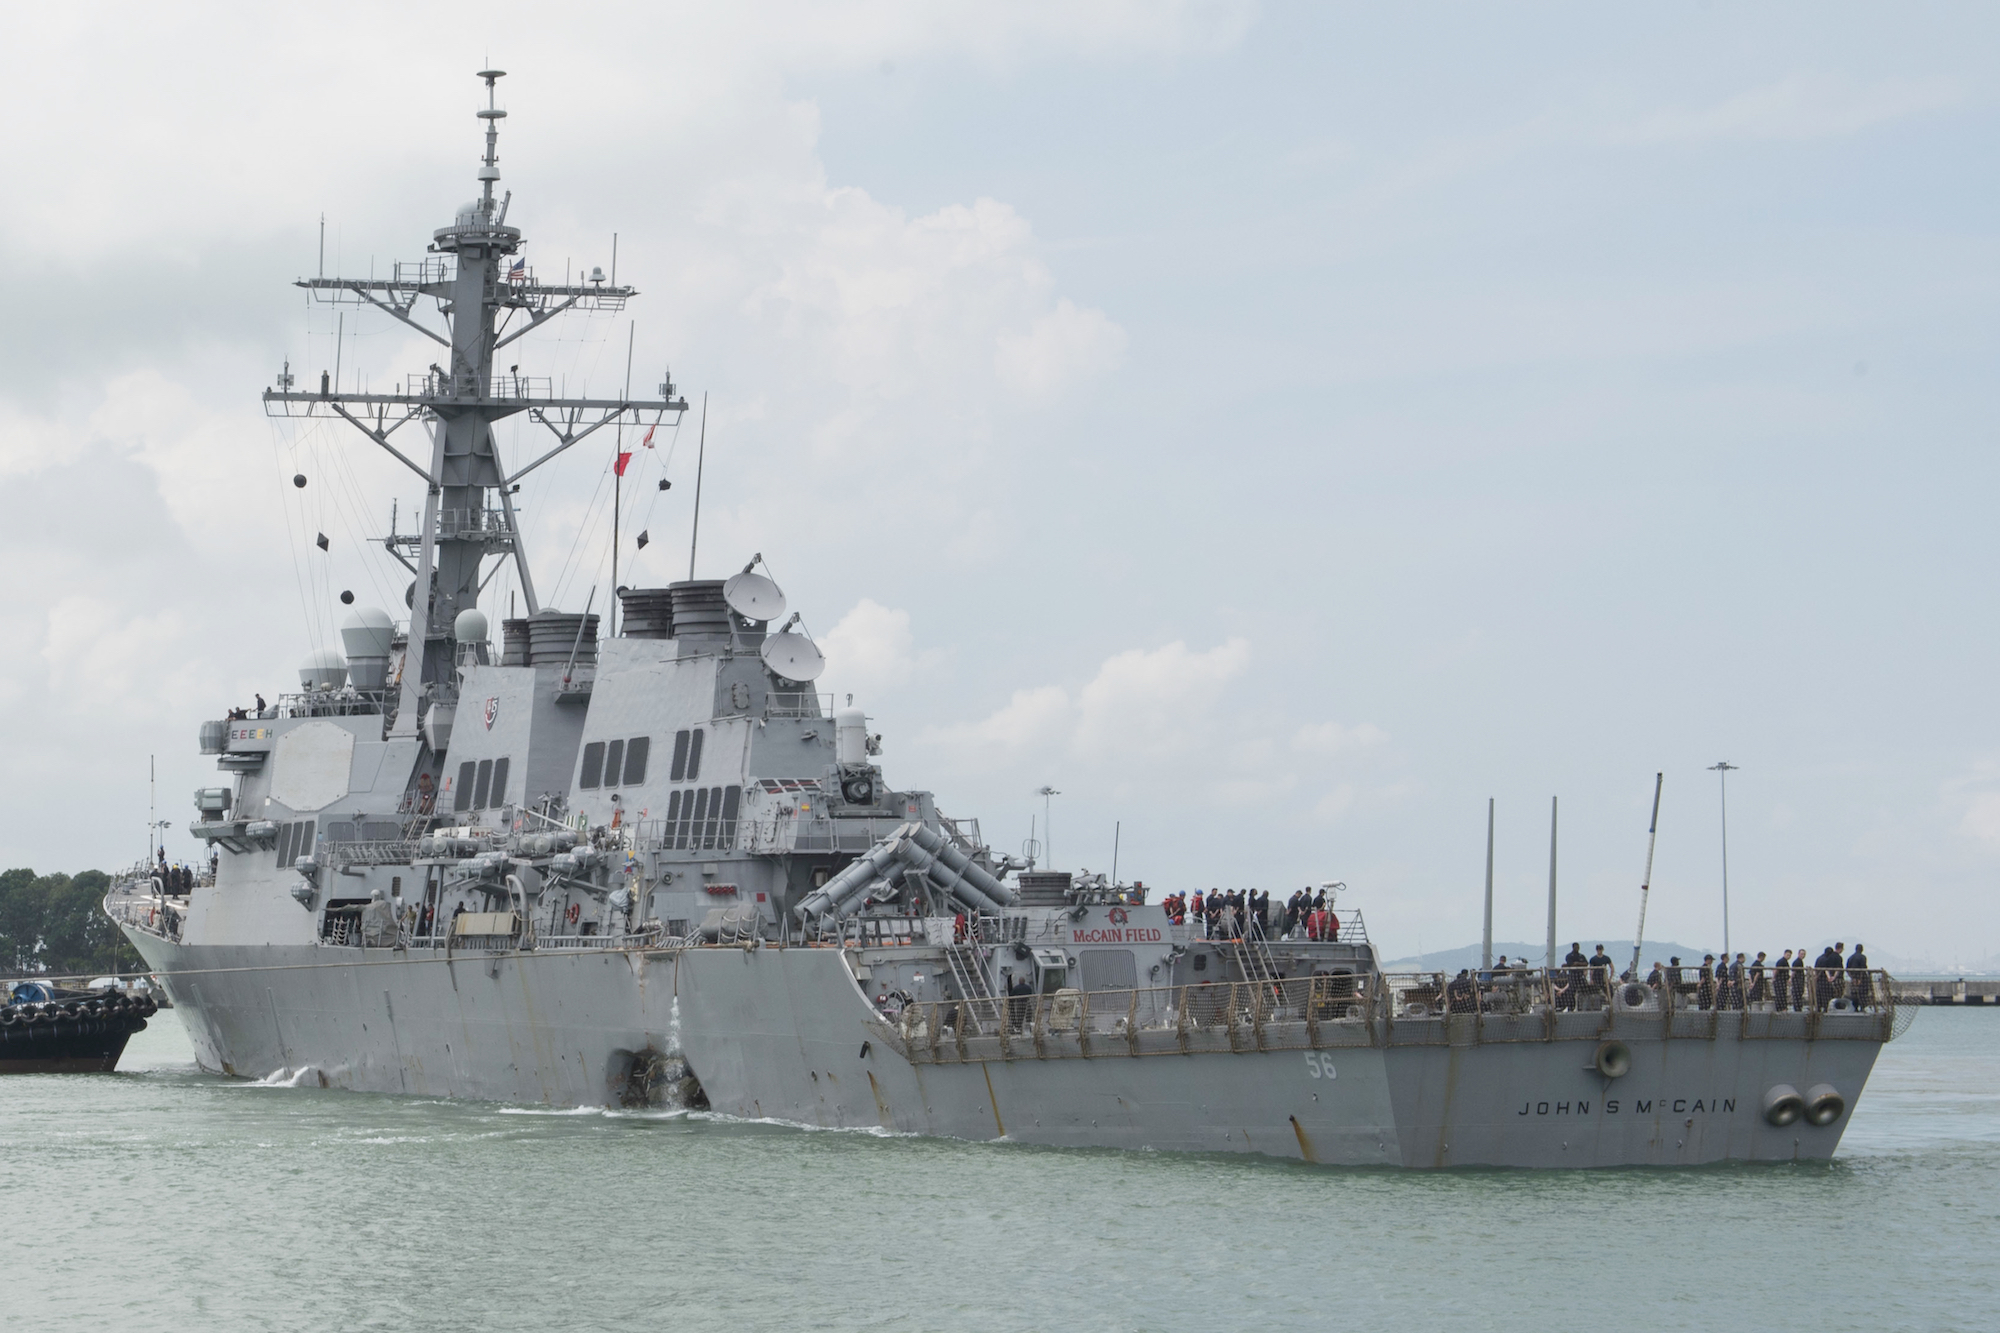 Navy to Pause Operations, Review Collisions, With 10 Missing